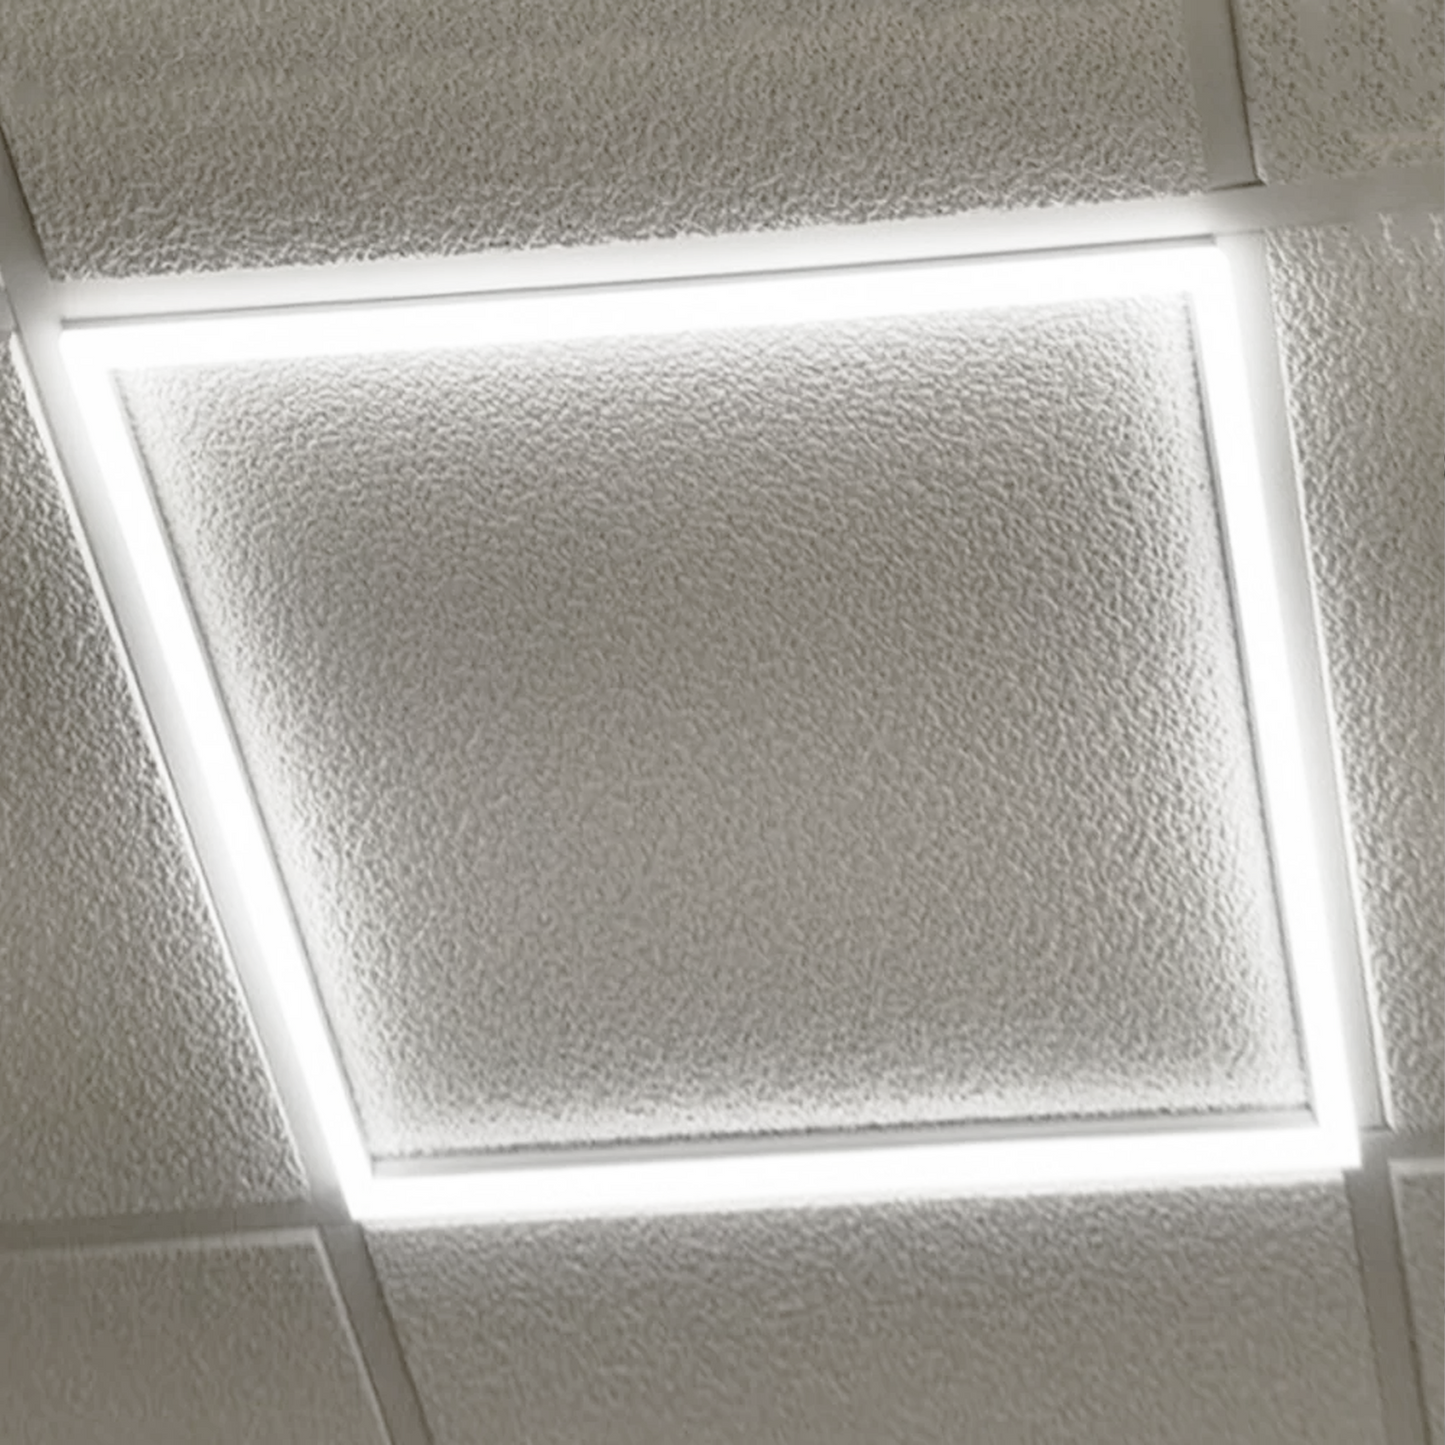 2 ft. x 2 ft. LED T-Bar Panel Light, 20W/30W/40W Wattage adjustable, 3000K/4000K/5000K CCT Changeable, 4800LM, >80 CRI, Dimmable, ETL, DLC Listed, For Offices, Schools, Hospitality, Retail